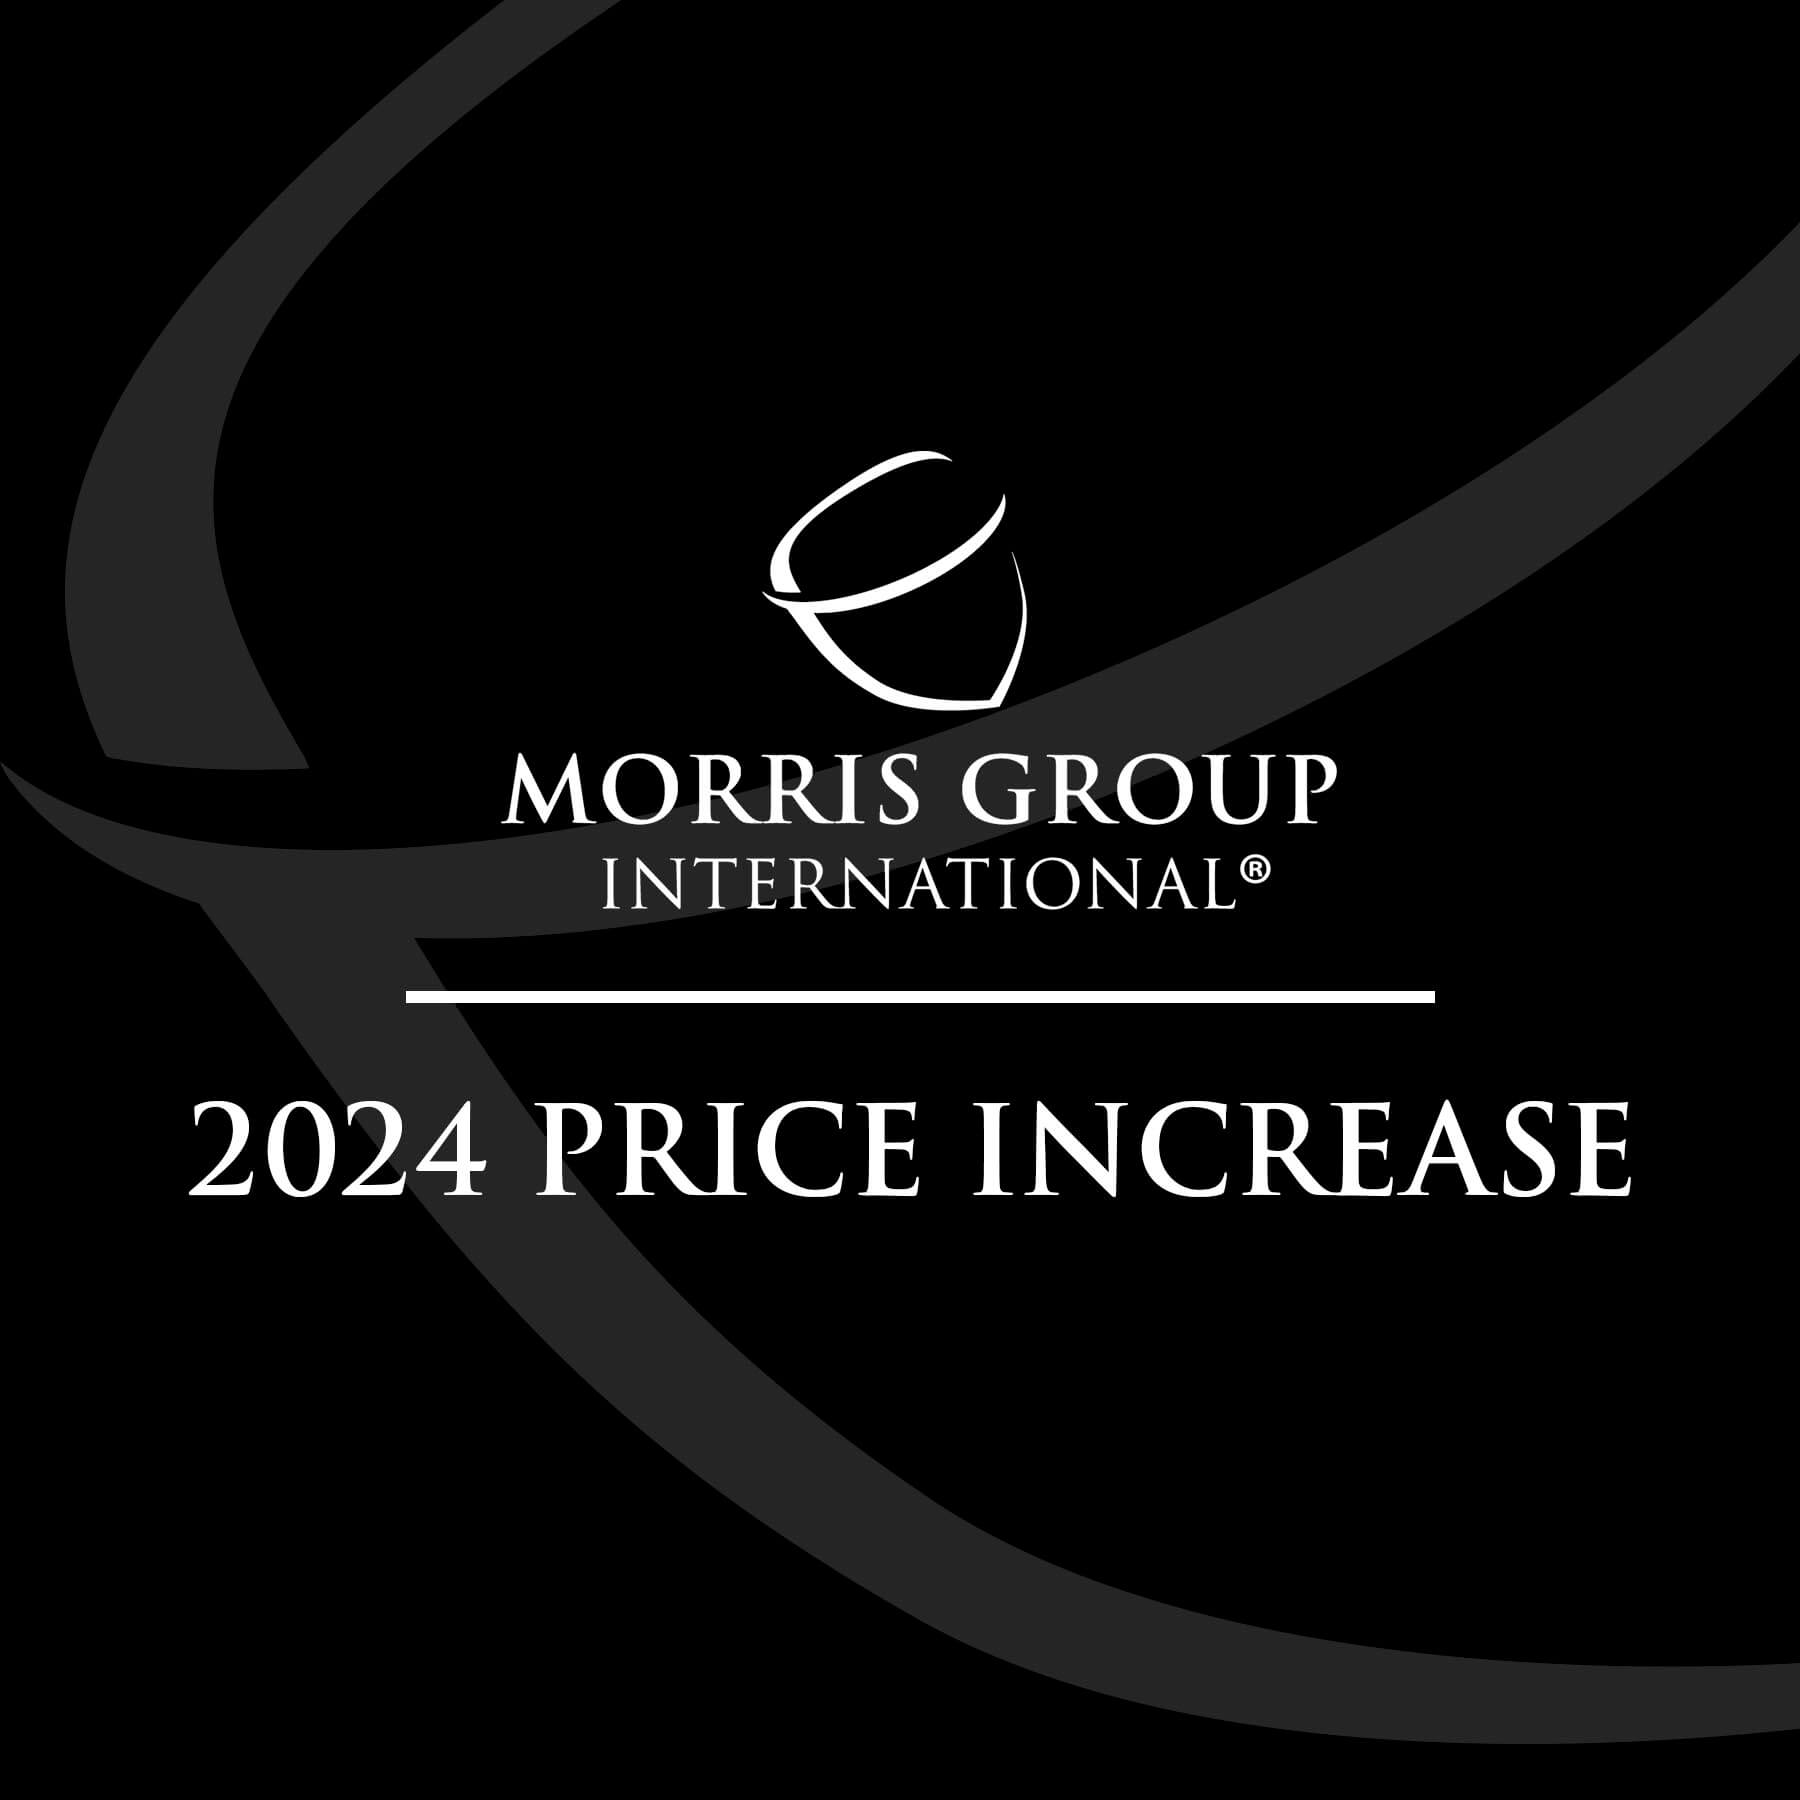 Morris Group International Announces 2024 Price Increase for Plumbing and Fire Divisions